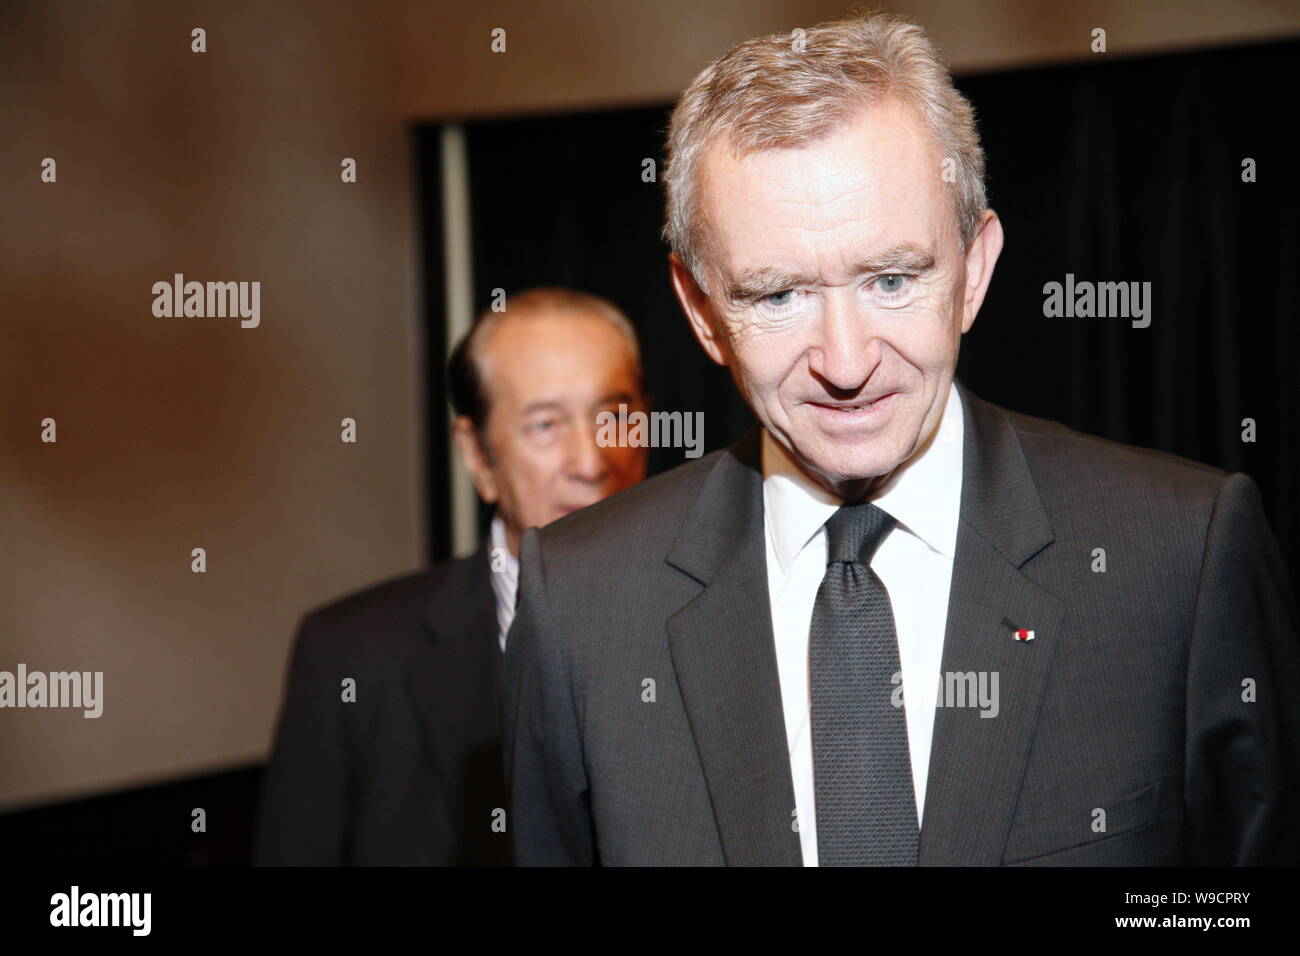 Bernard Arnault (F), CEO of Moet Hennessy Louis Vuitton (MHLV) and